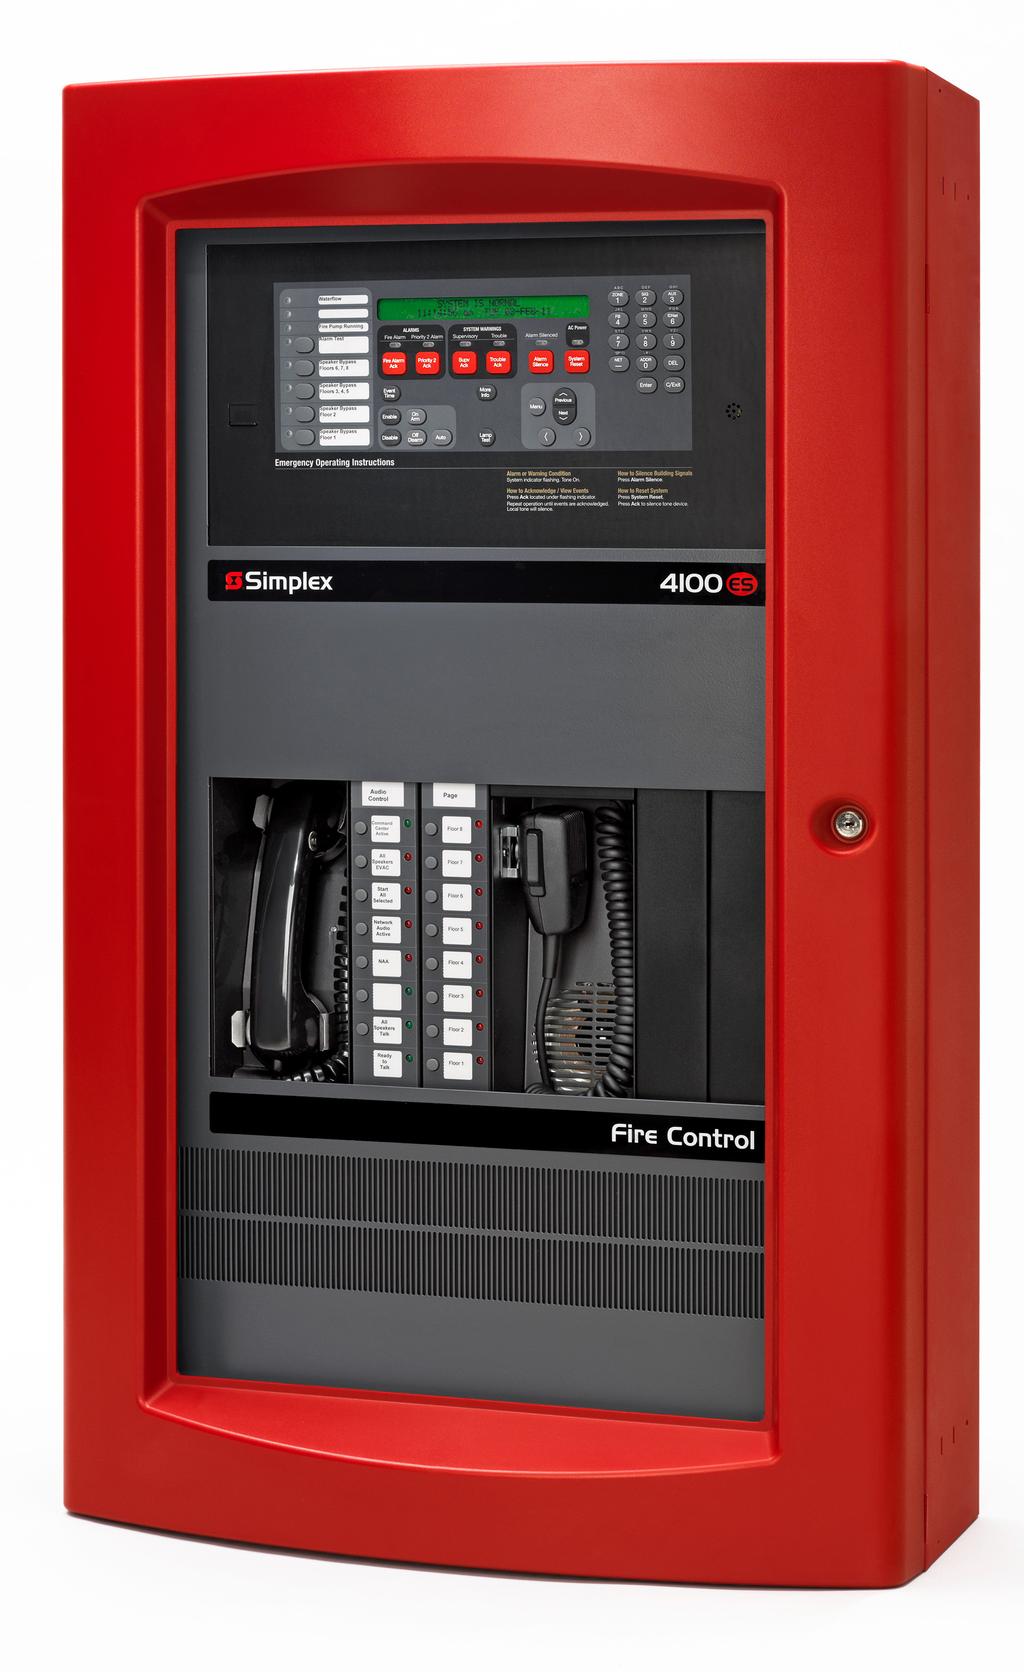 4100ES Fire Control Panels, C, CSFM Listed; FM Approved, MEA (NYC) Acceptance* Features Standard addressable interfaces include: IDNet addressable device interface with 250 points that support True